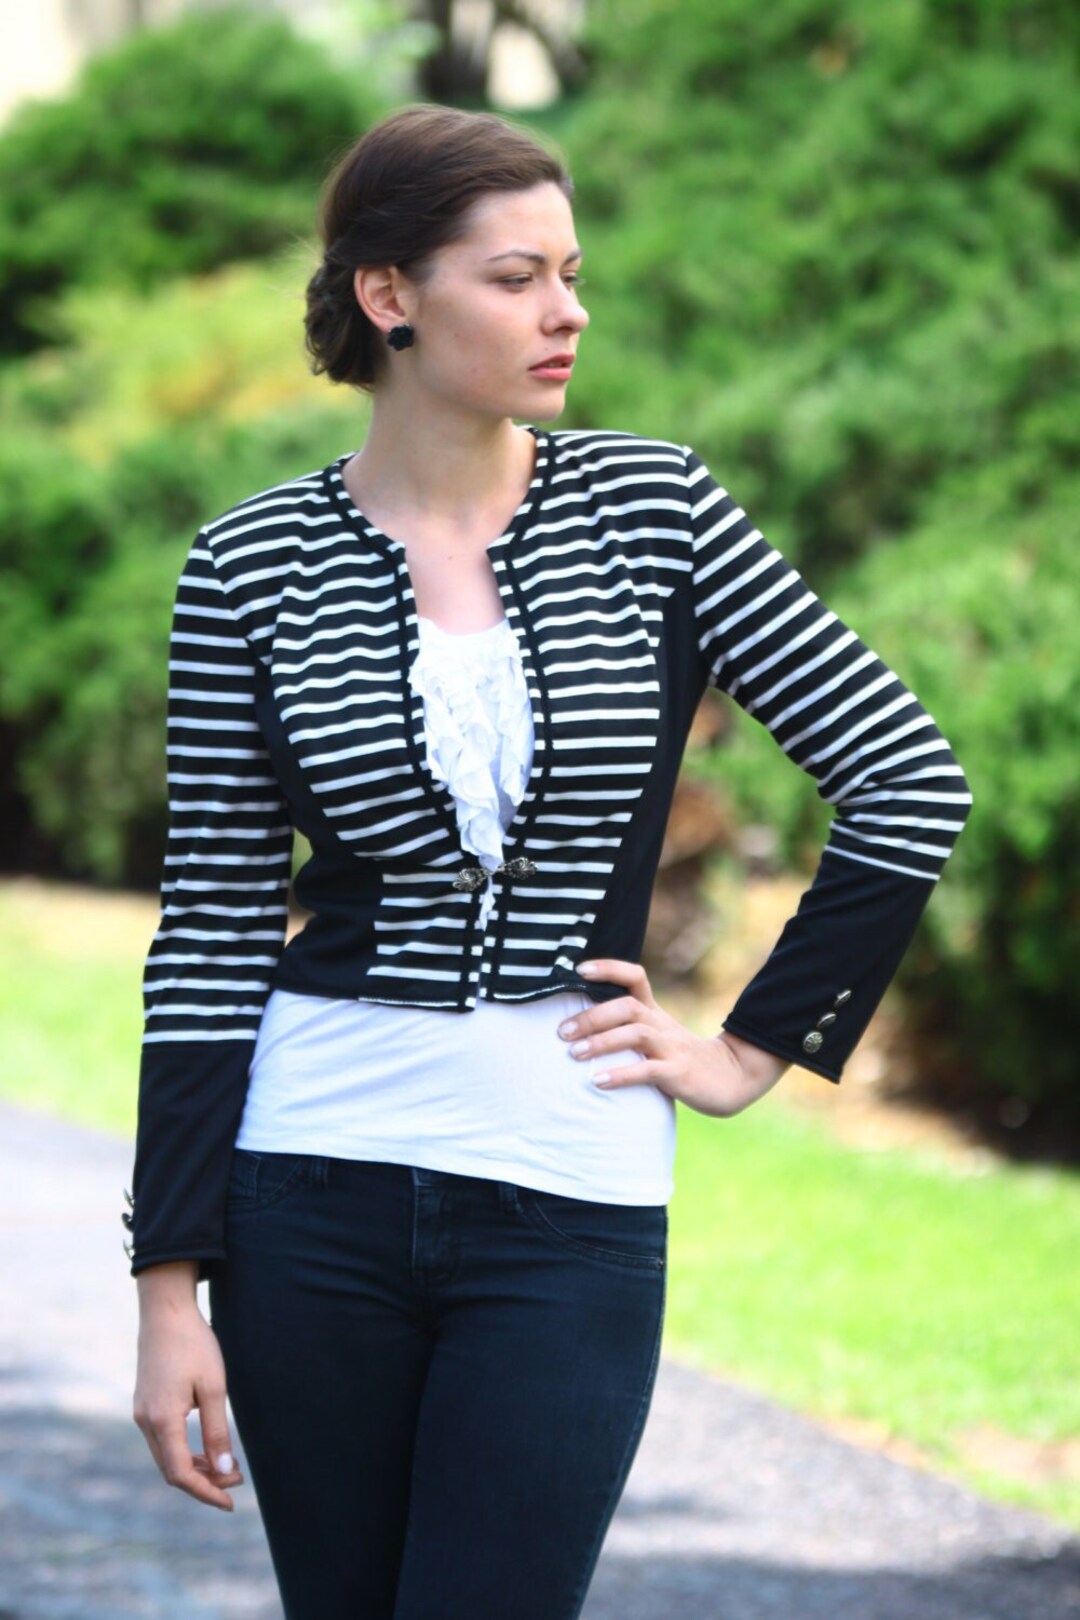 Black and White Stripes Cropped Jacket/ Stretchy Knit/ Princess Cut Design  for Ladies With Large Bust Small Waist/ Everyday Cropped Jacket 